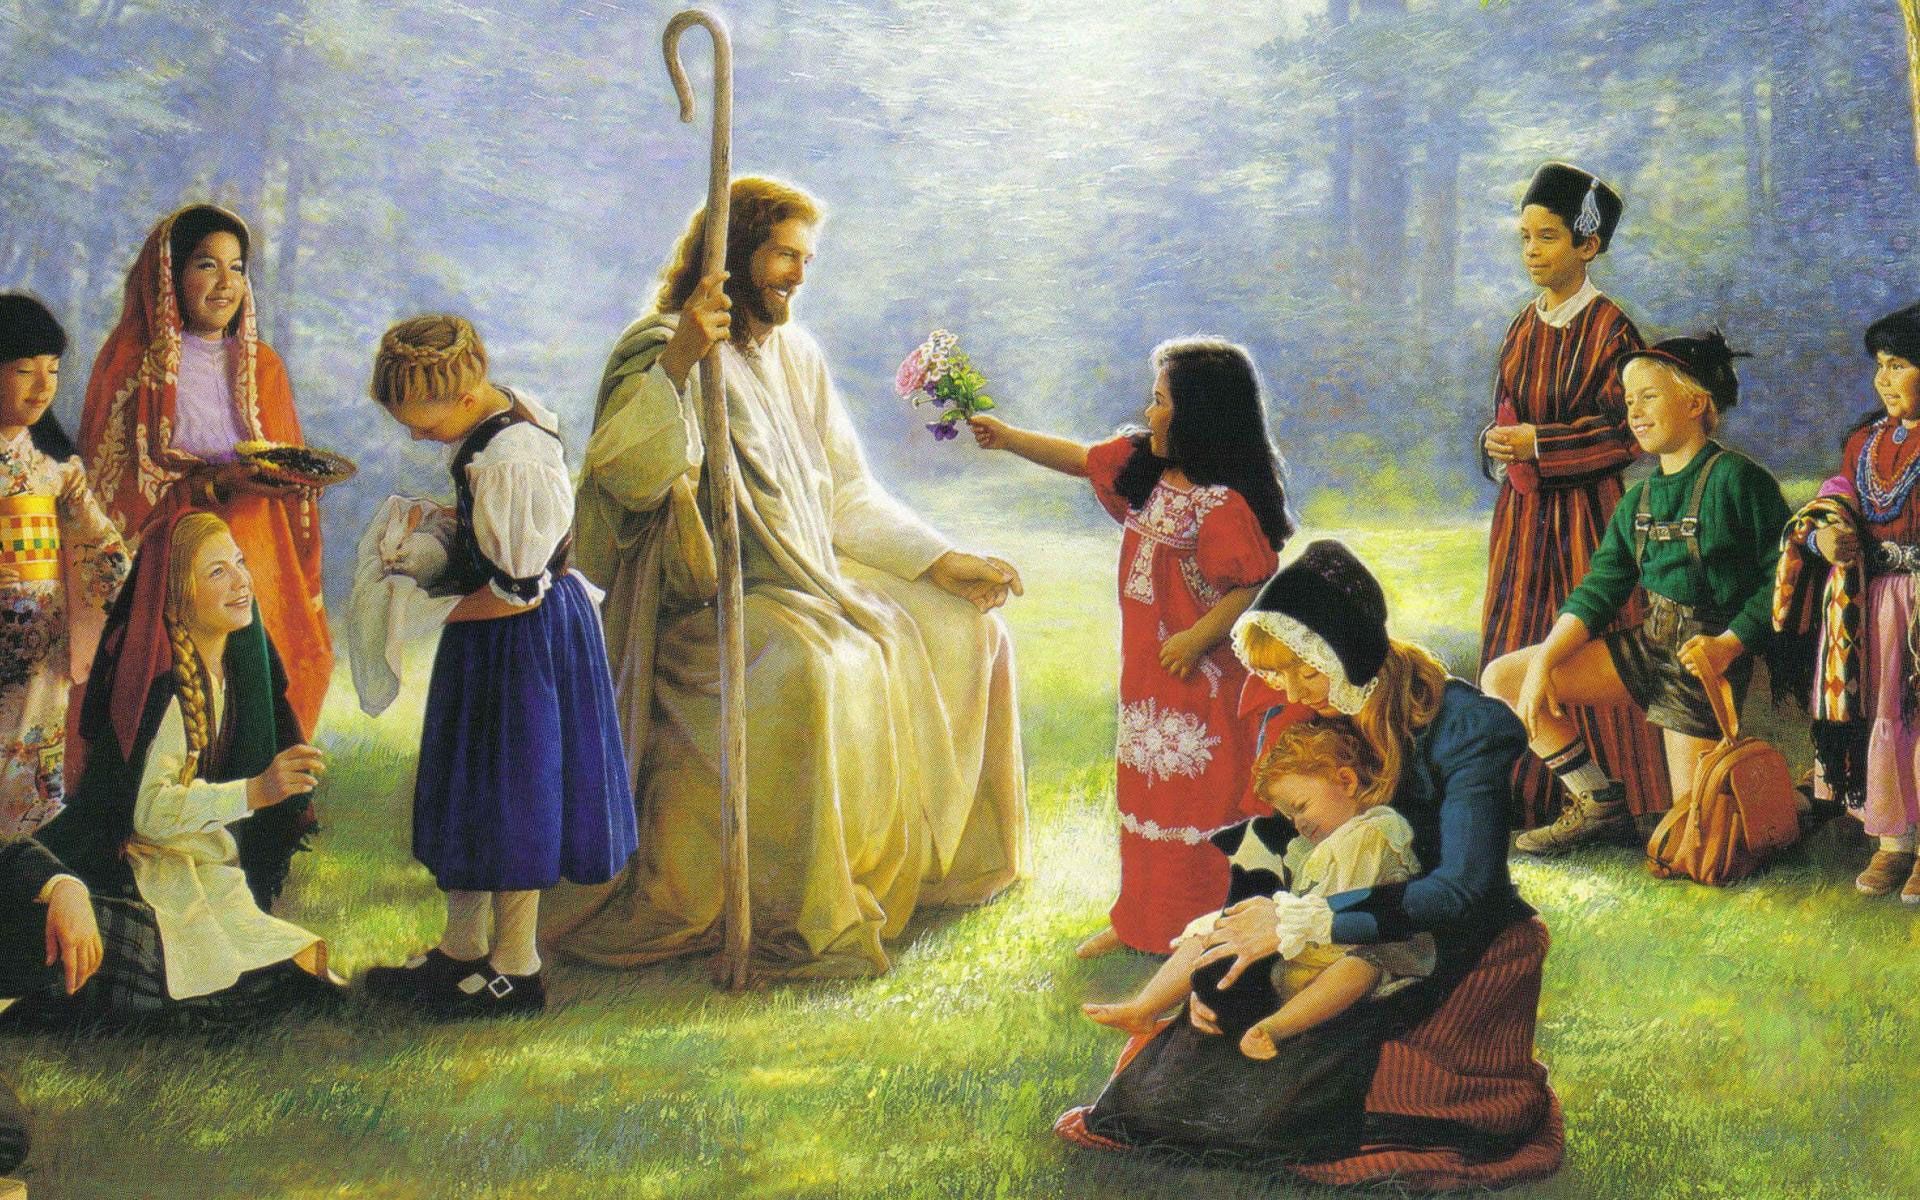 After Jesus Loves Me, Jesus Loves the Little Children is one of the first songs children learn in Sunday School. Th. Jesus wallpaper, Jesus image, Jesus picture